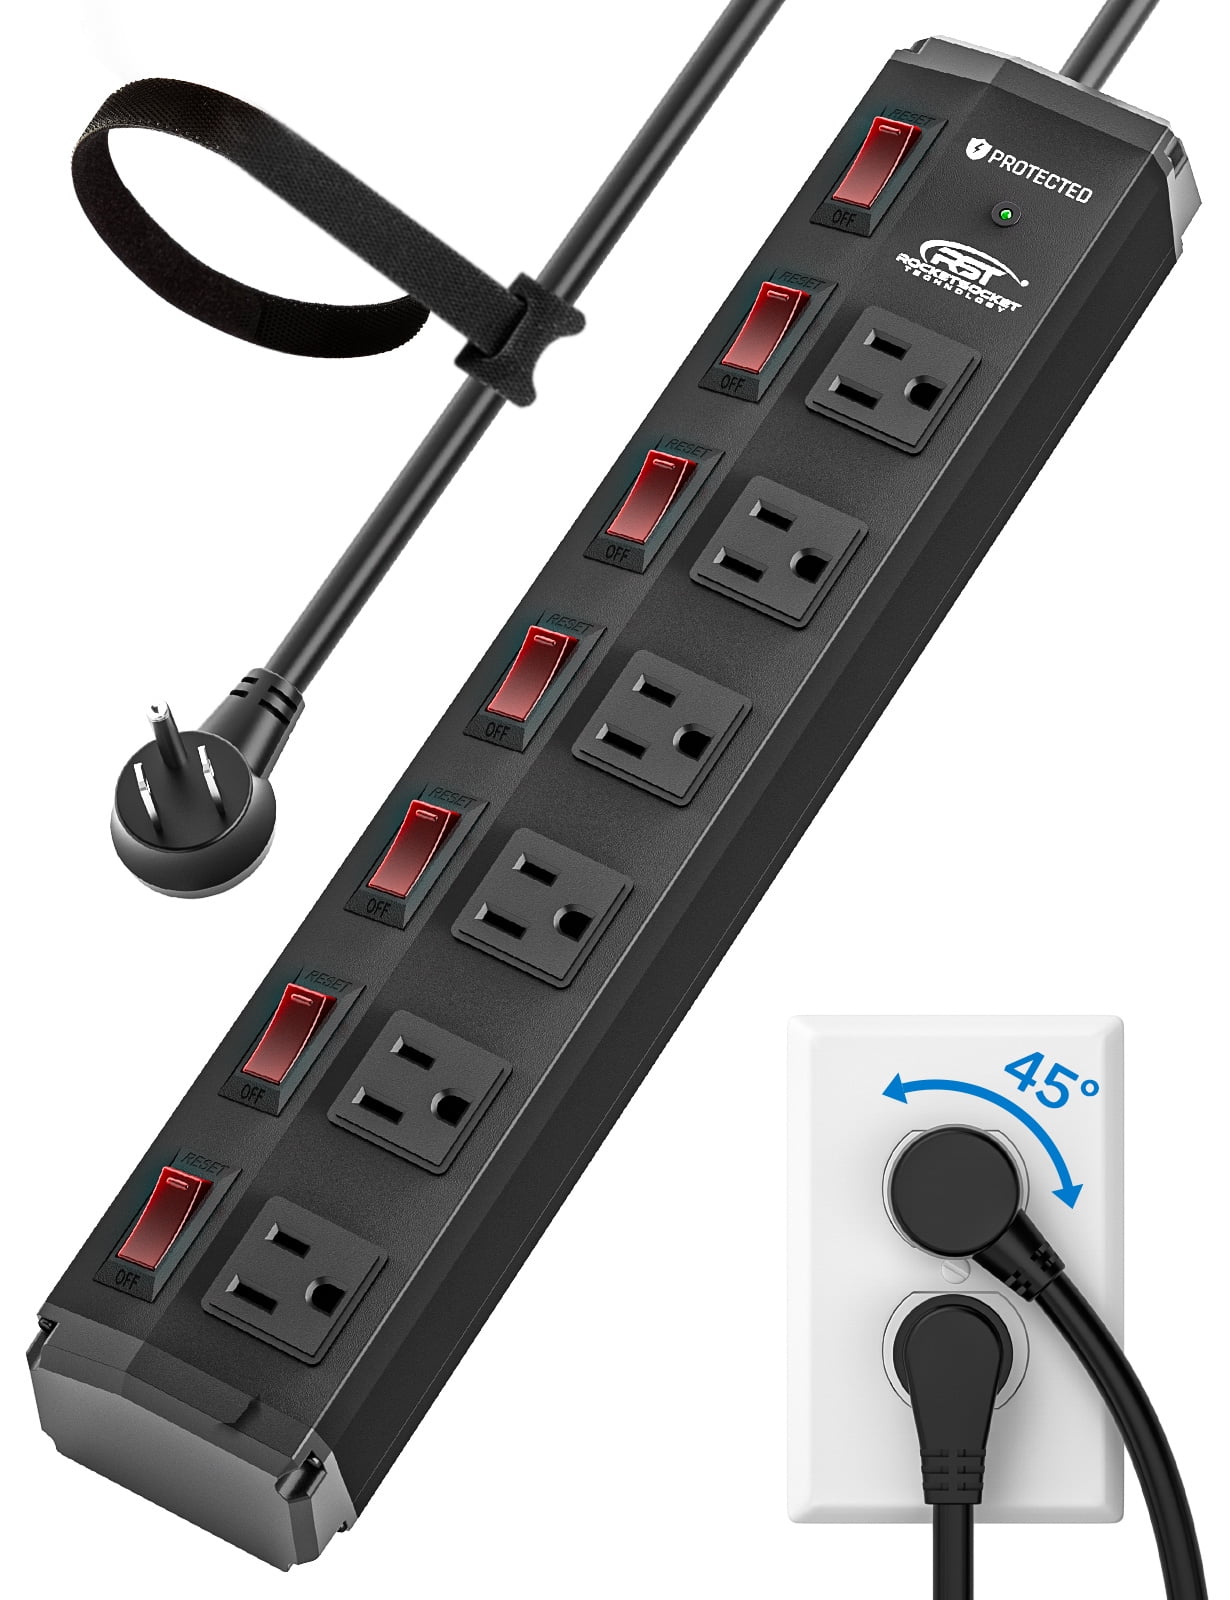 Flat Plug Warranty Fast Charge GE Power Strip Surge Protector 6ft Long Power Cord 6 Outlets 37211 White Wall Mount 